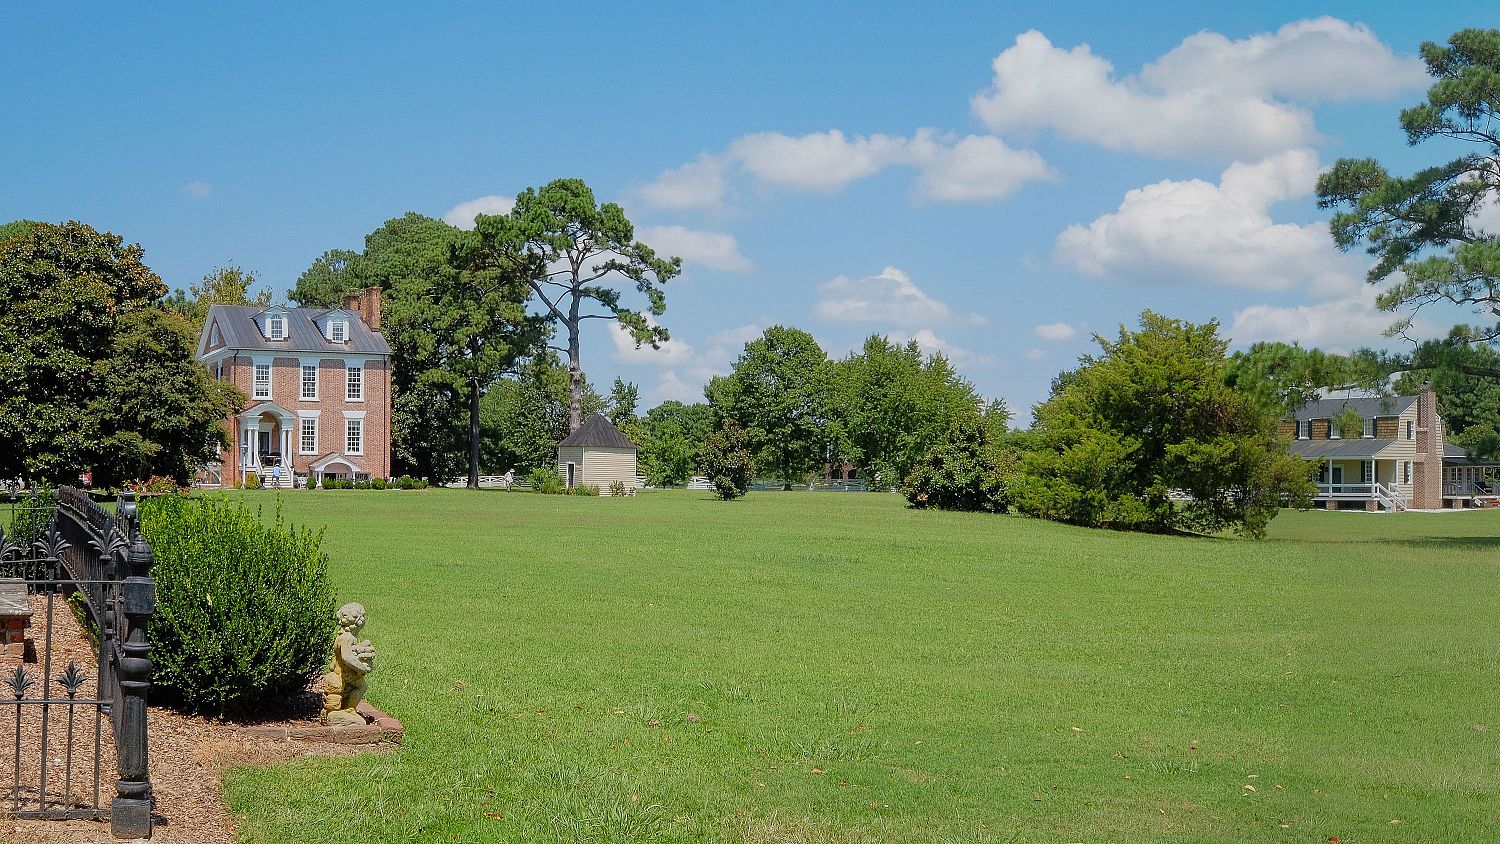 The open greensward of the Mulberry Hill manor house seen from the shore of the Albemarle Sound